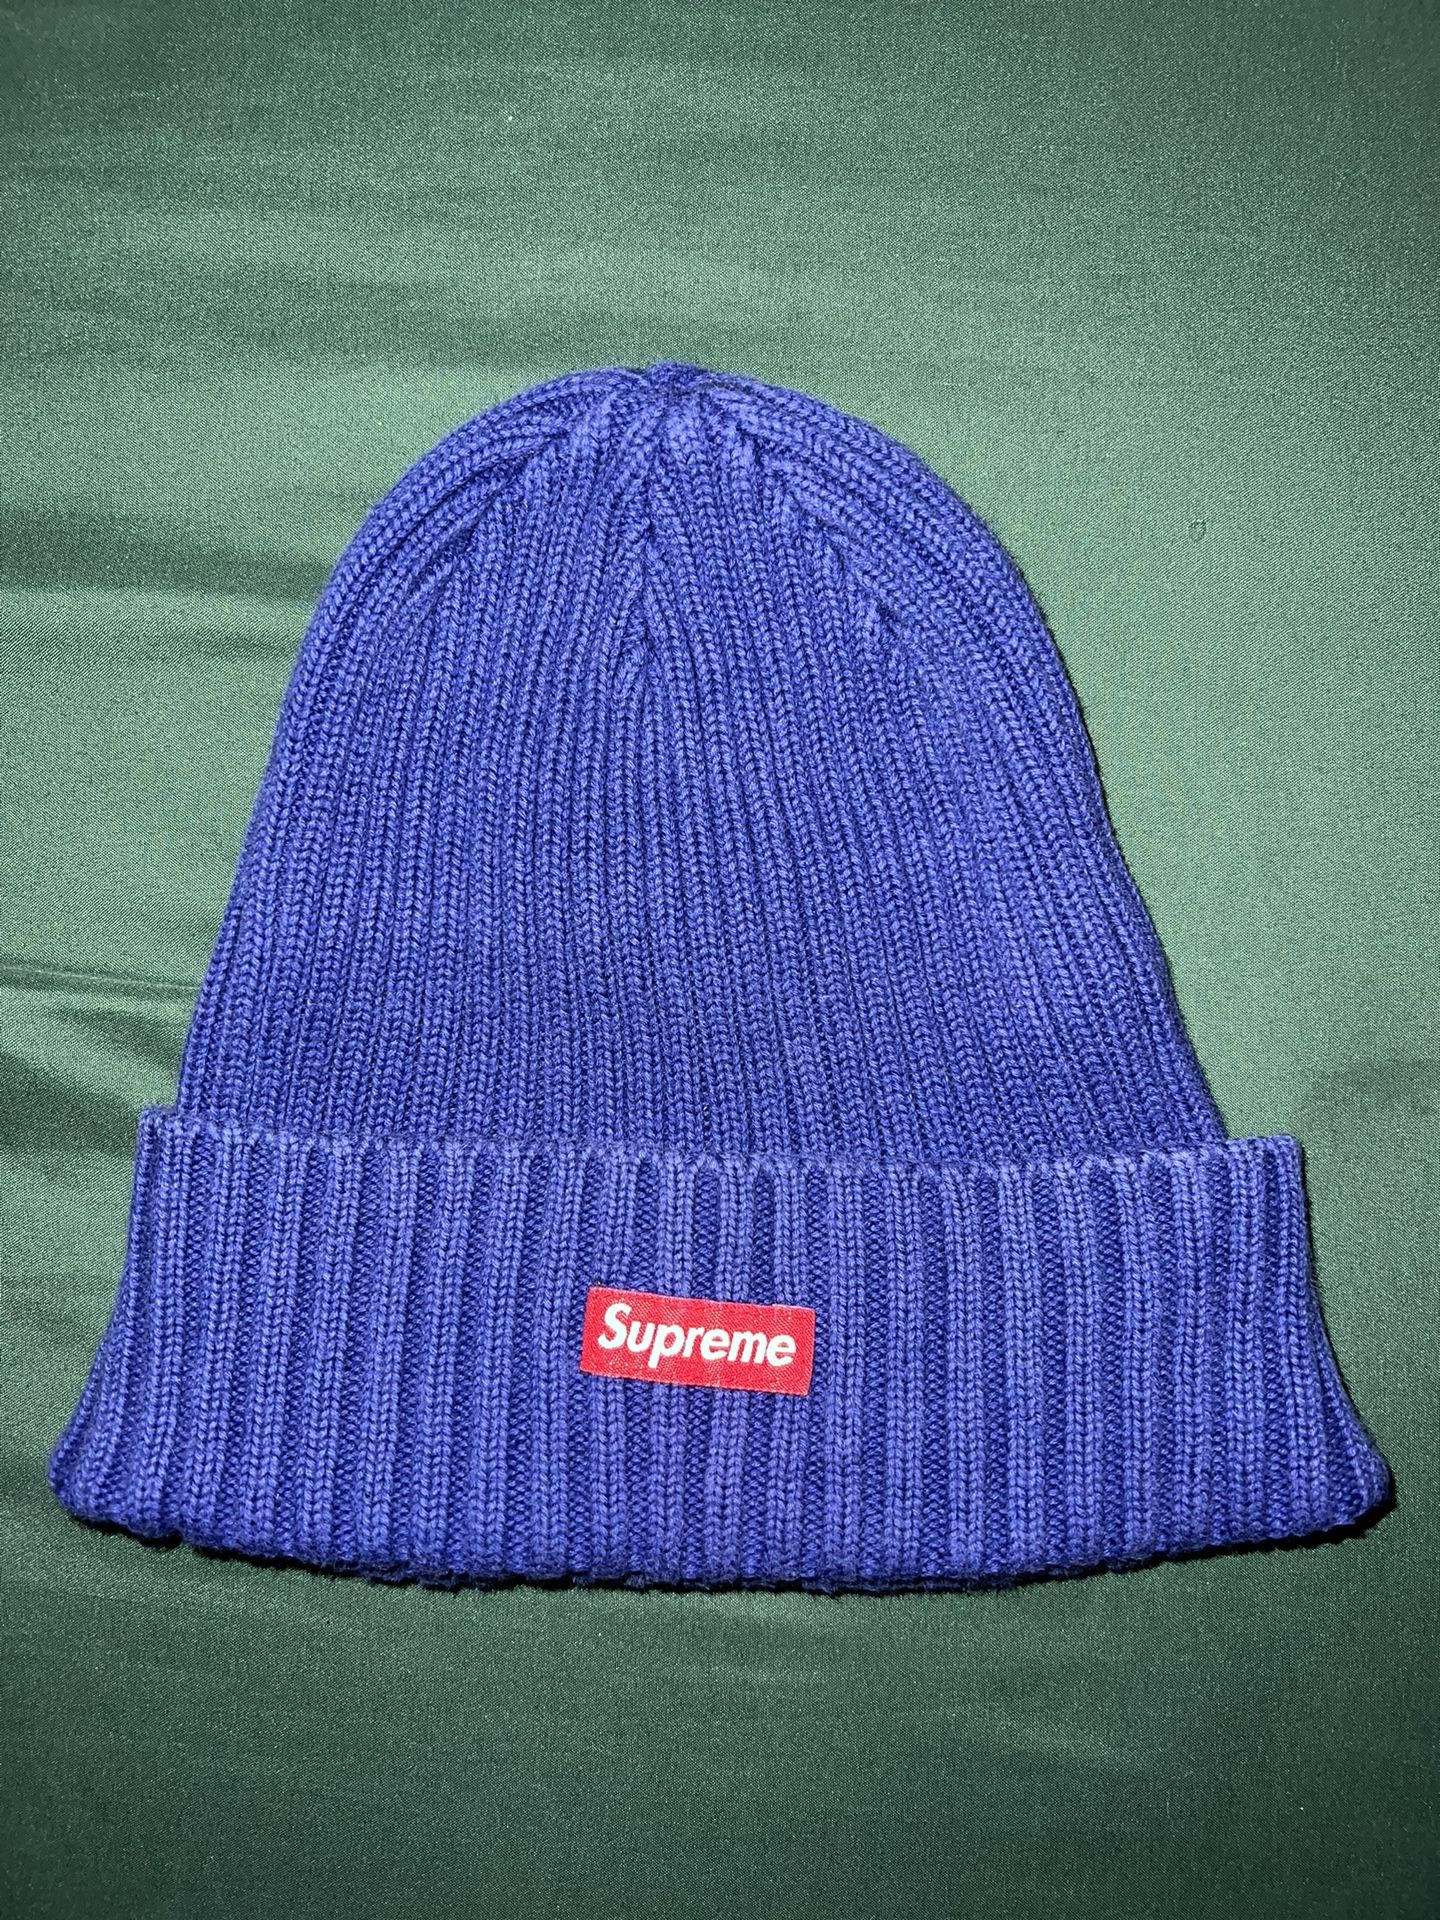 Supreme Overdyed Beanie SS20 for Sale in Hayward, CA - OfferUp